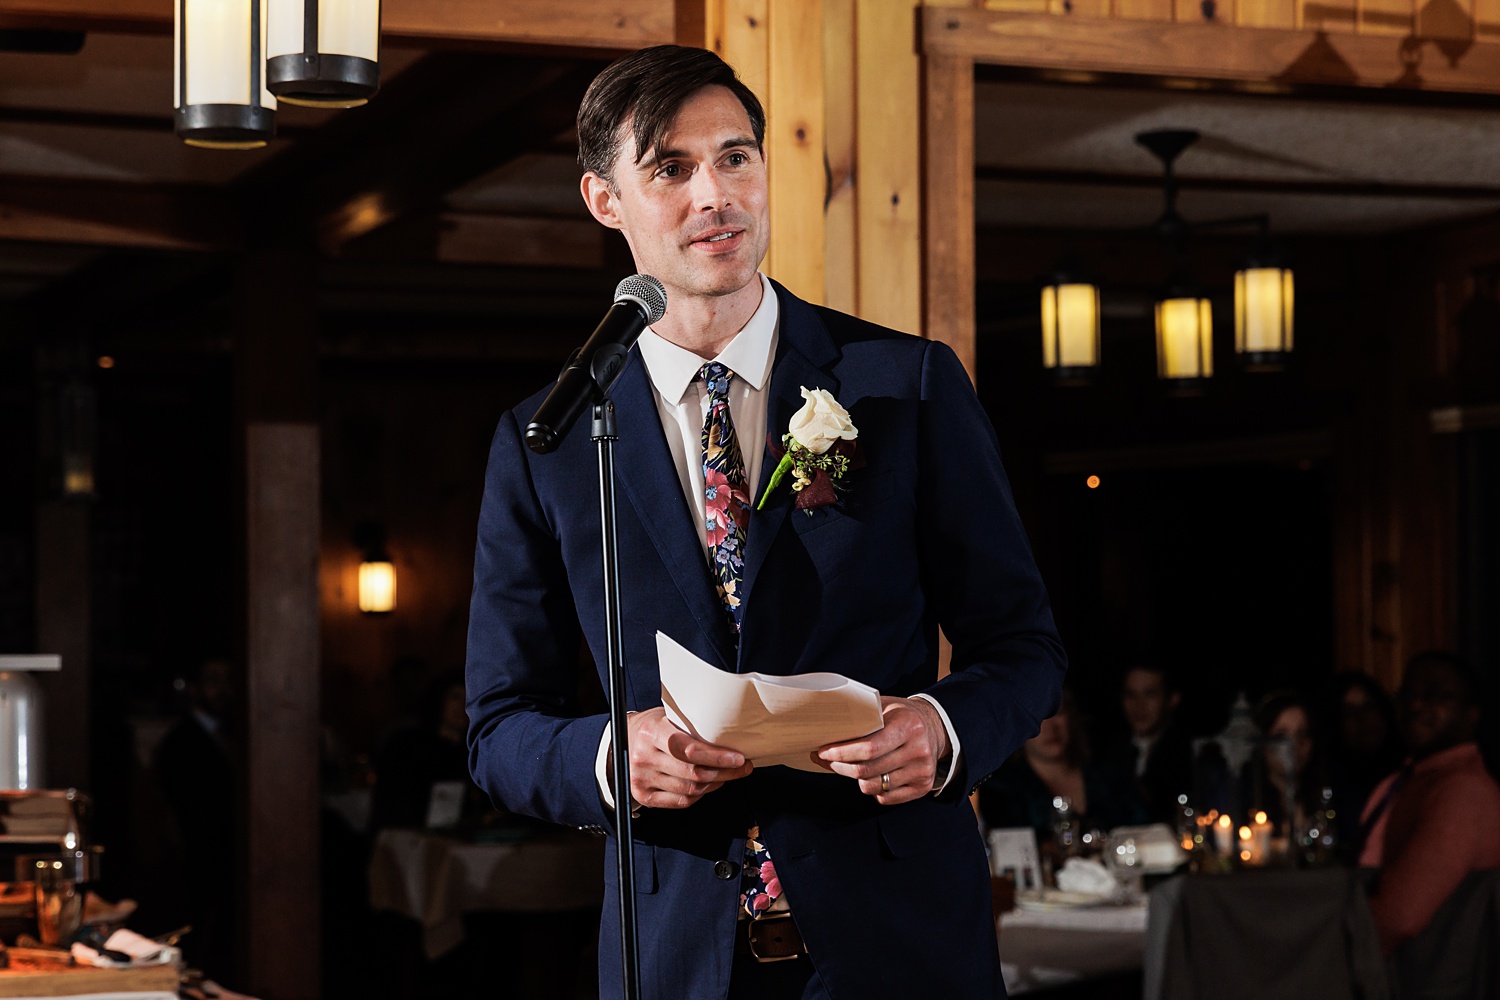 Best man gives an emotional toast at the wedding reception